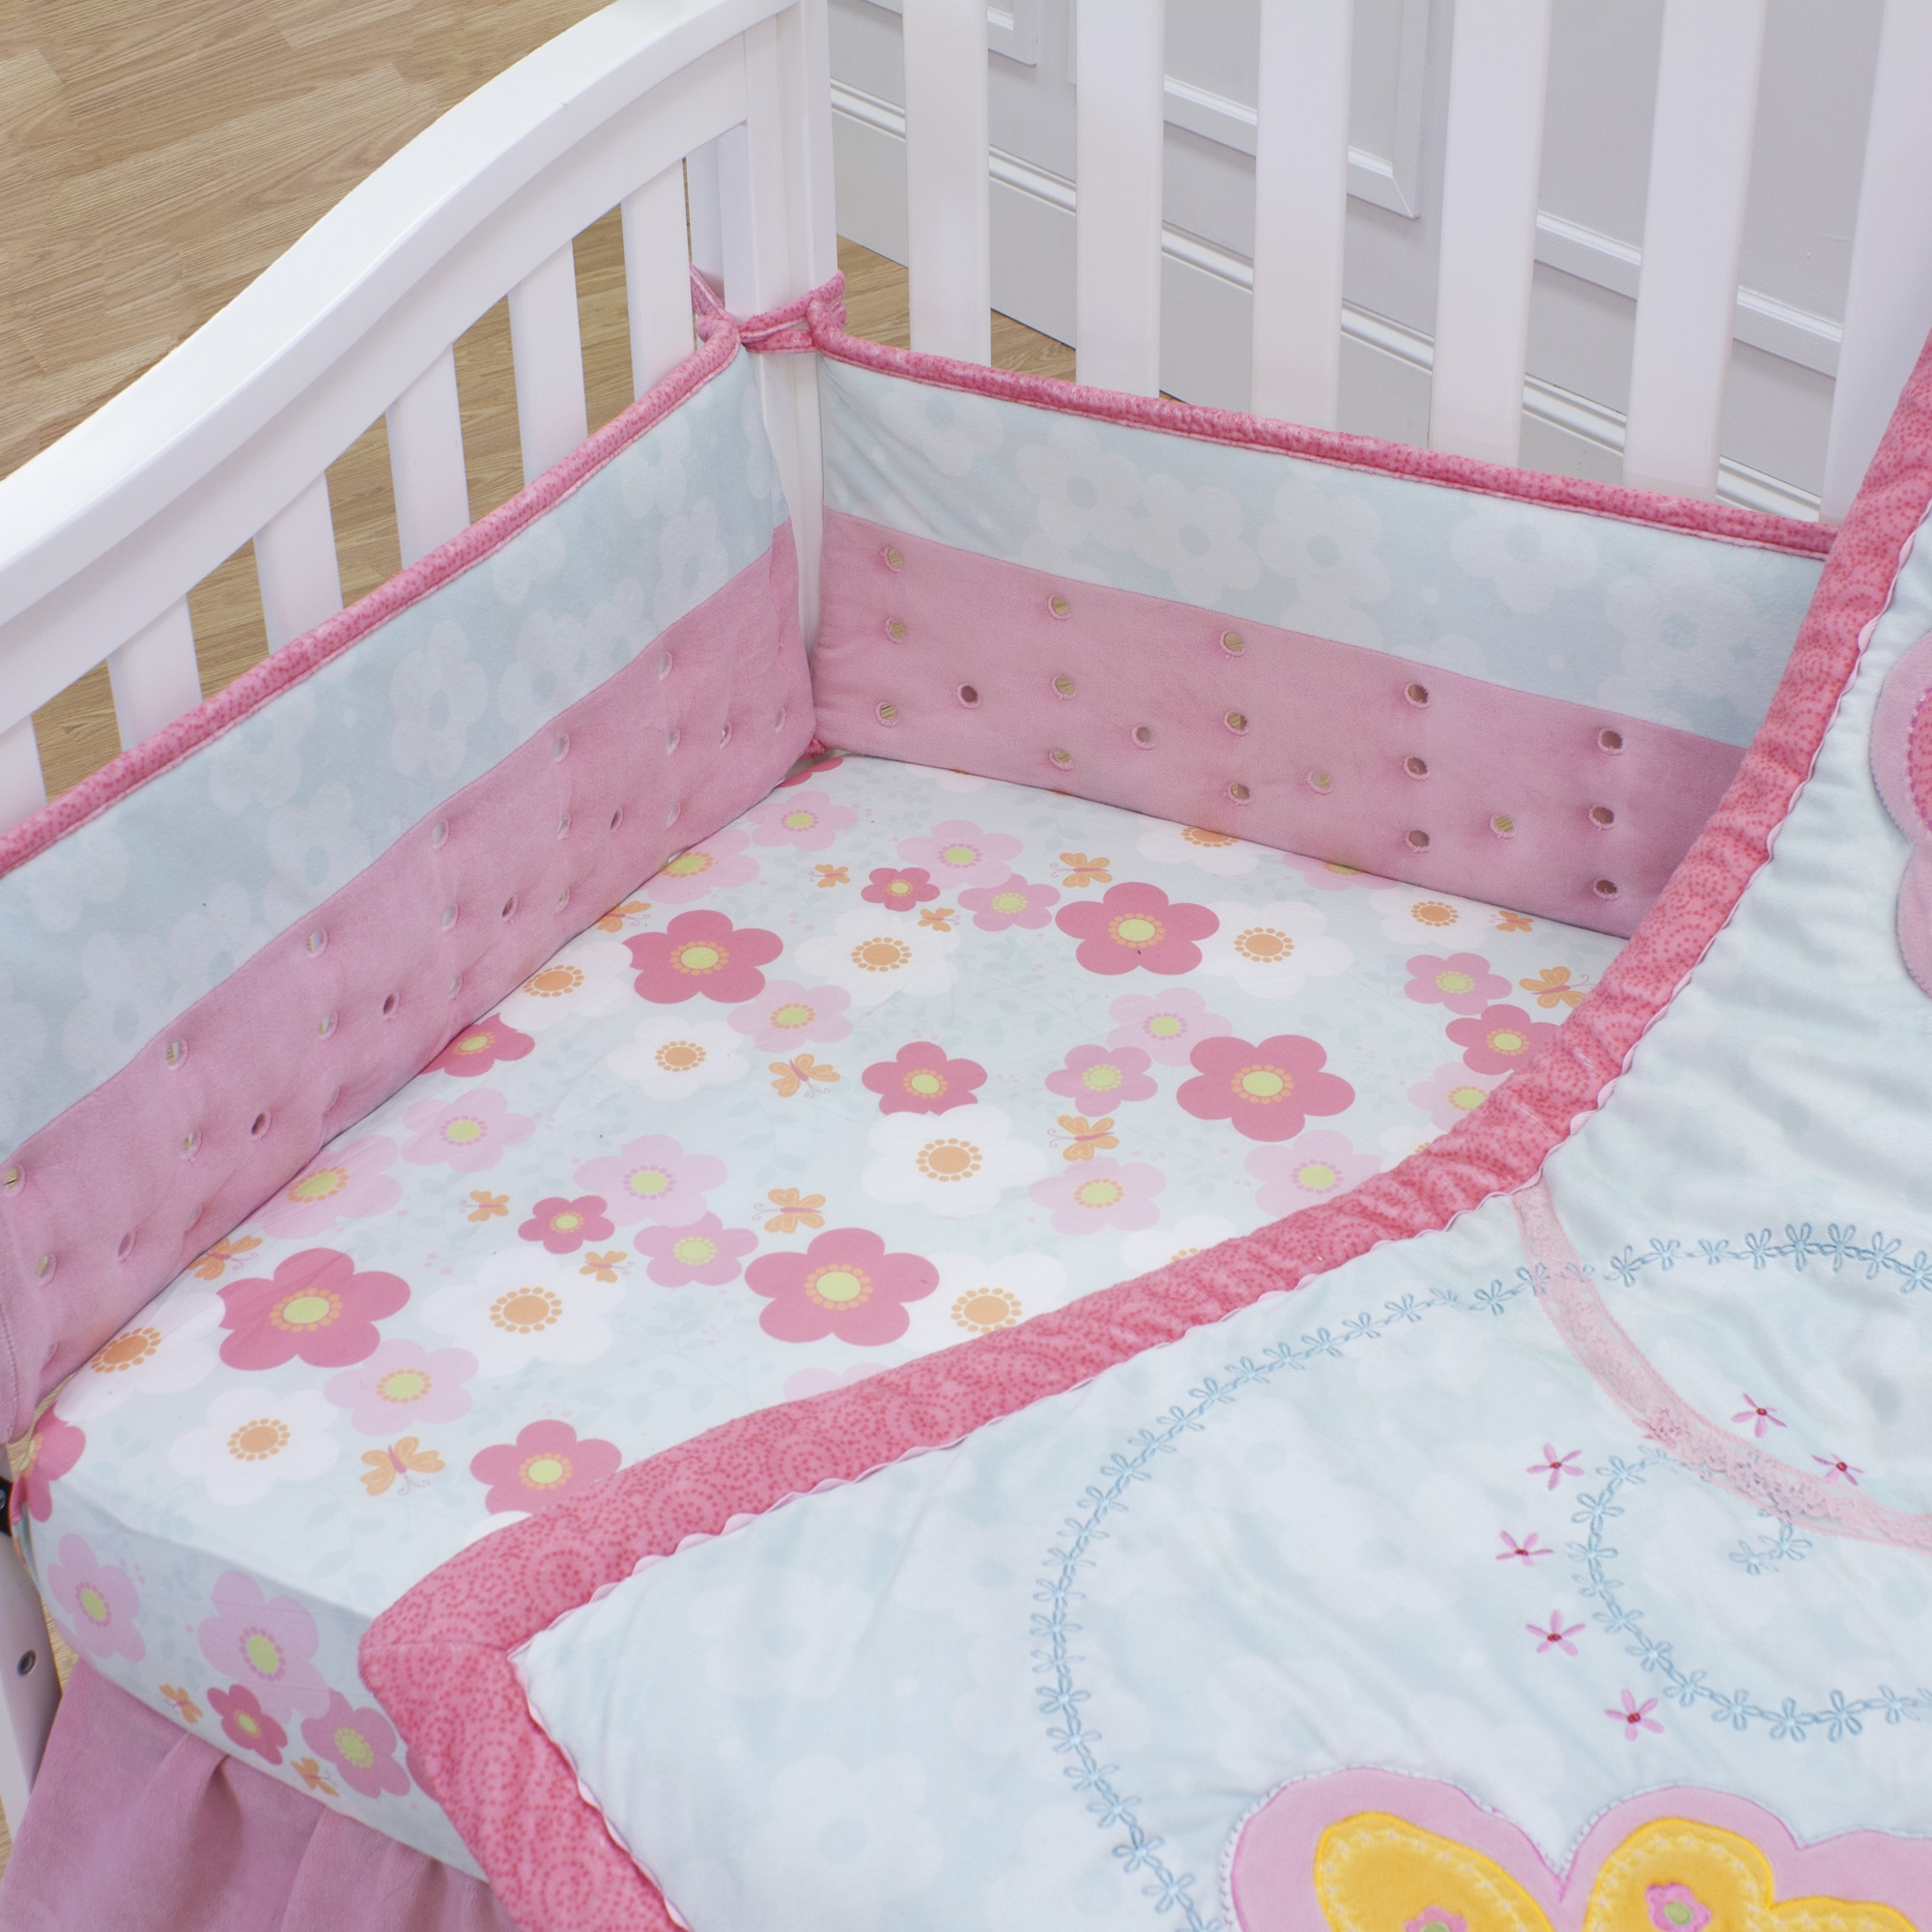 Nurture Imagination Wings Airflow Crib Bumper (Aqua/ pinkMaterials Poly cotton blendCare instructions Machine washableDimensions Long sides 52 inches x 10.25 inchesShort sides 27 inches x 10.25 inchesThe digital images we display have the most accura